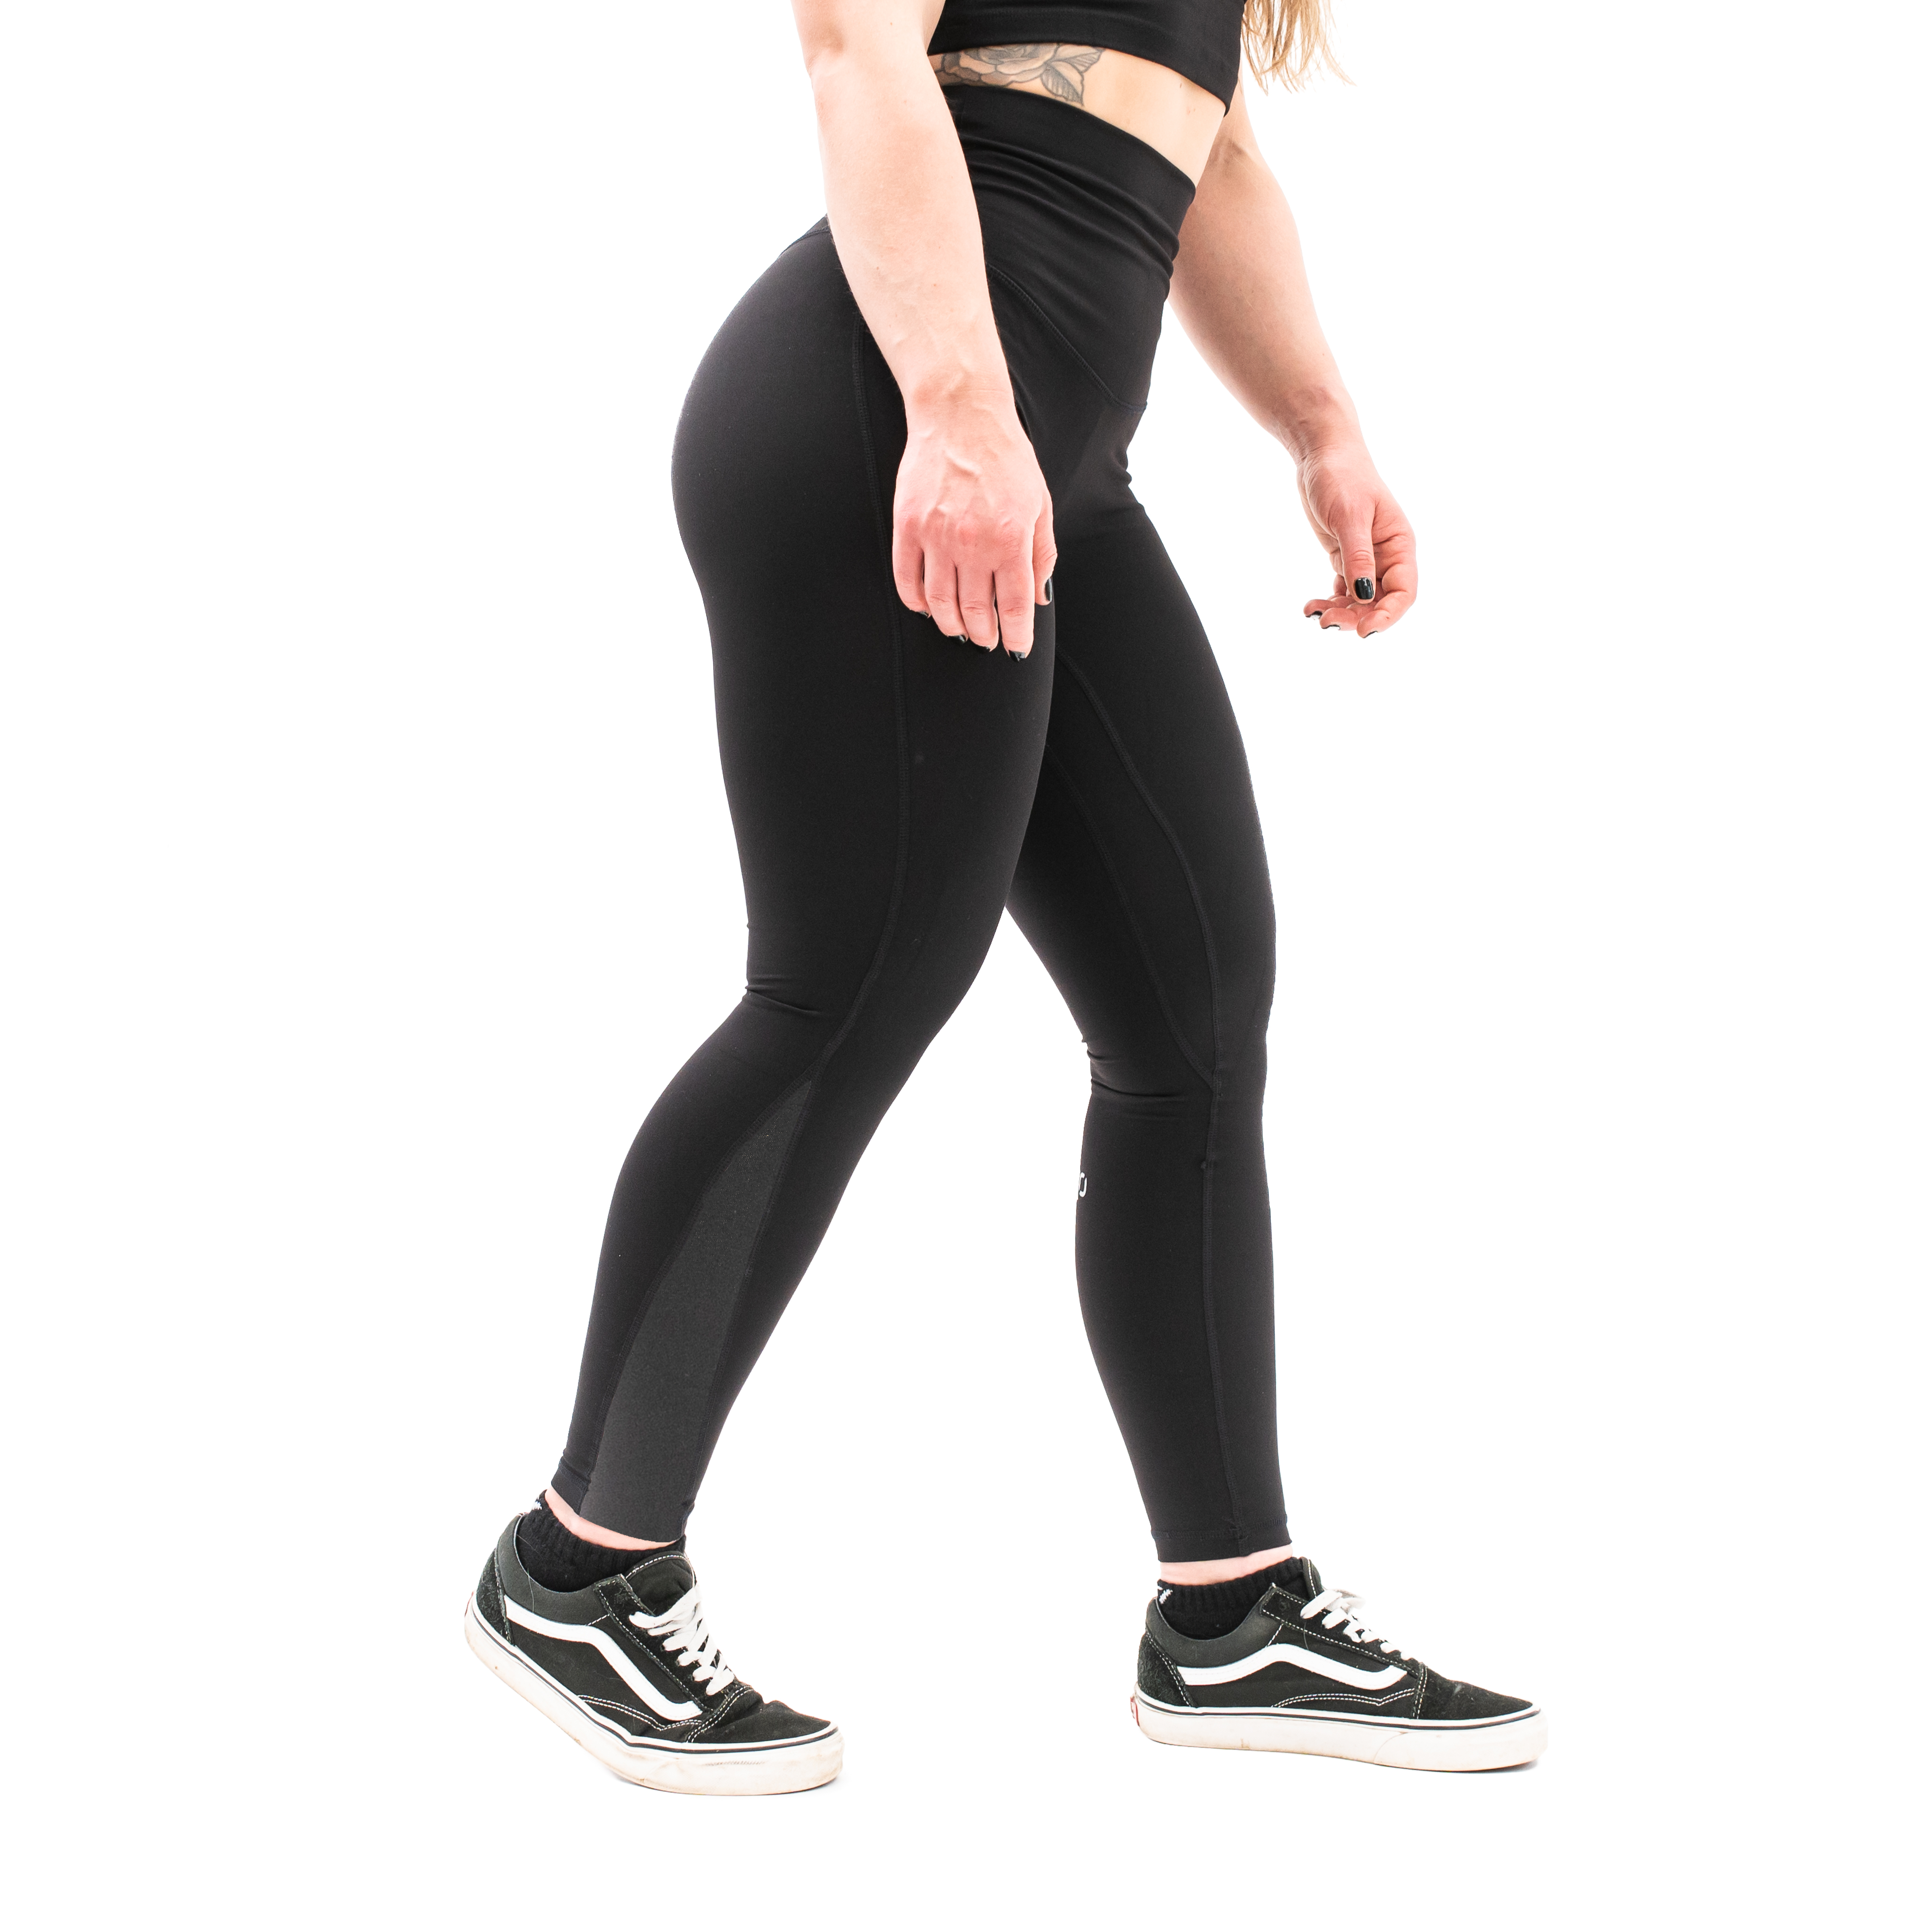 A7 XO Hew Leggings made from the same material as our XO Leggings, but are designed for 'thiccer' body types. The A7 XO Hew have high waistband to be more slimming around your waist and belly and have no seam line on the front for more comfortable movement. Purchase A7 XO Hew Leggings from A7 UK for shipping to UK and Europe. Women’s leggings for powerlifting and training in the gym. Weightlifting leggings for women.